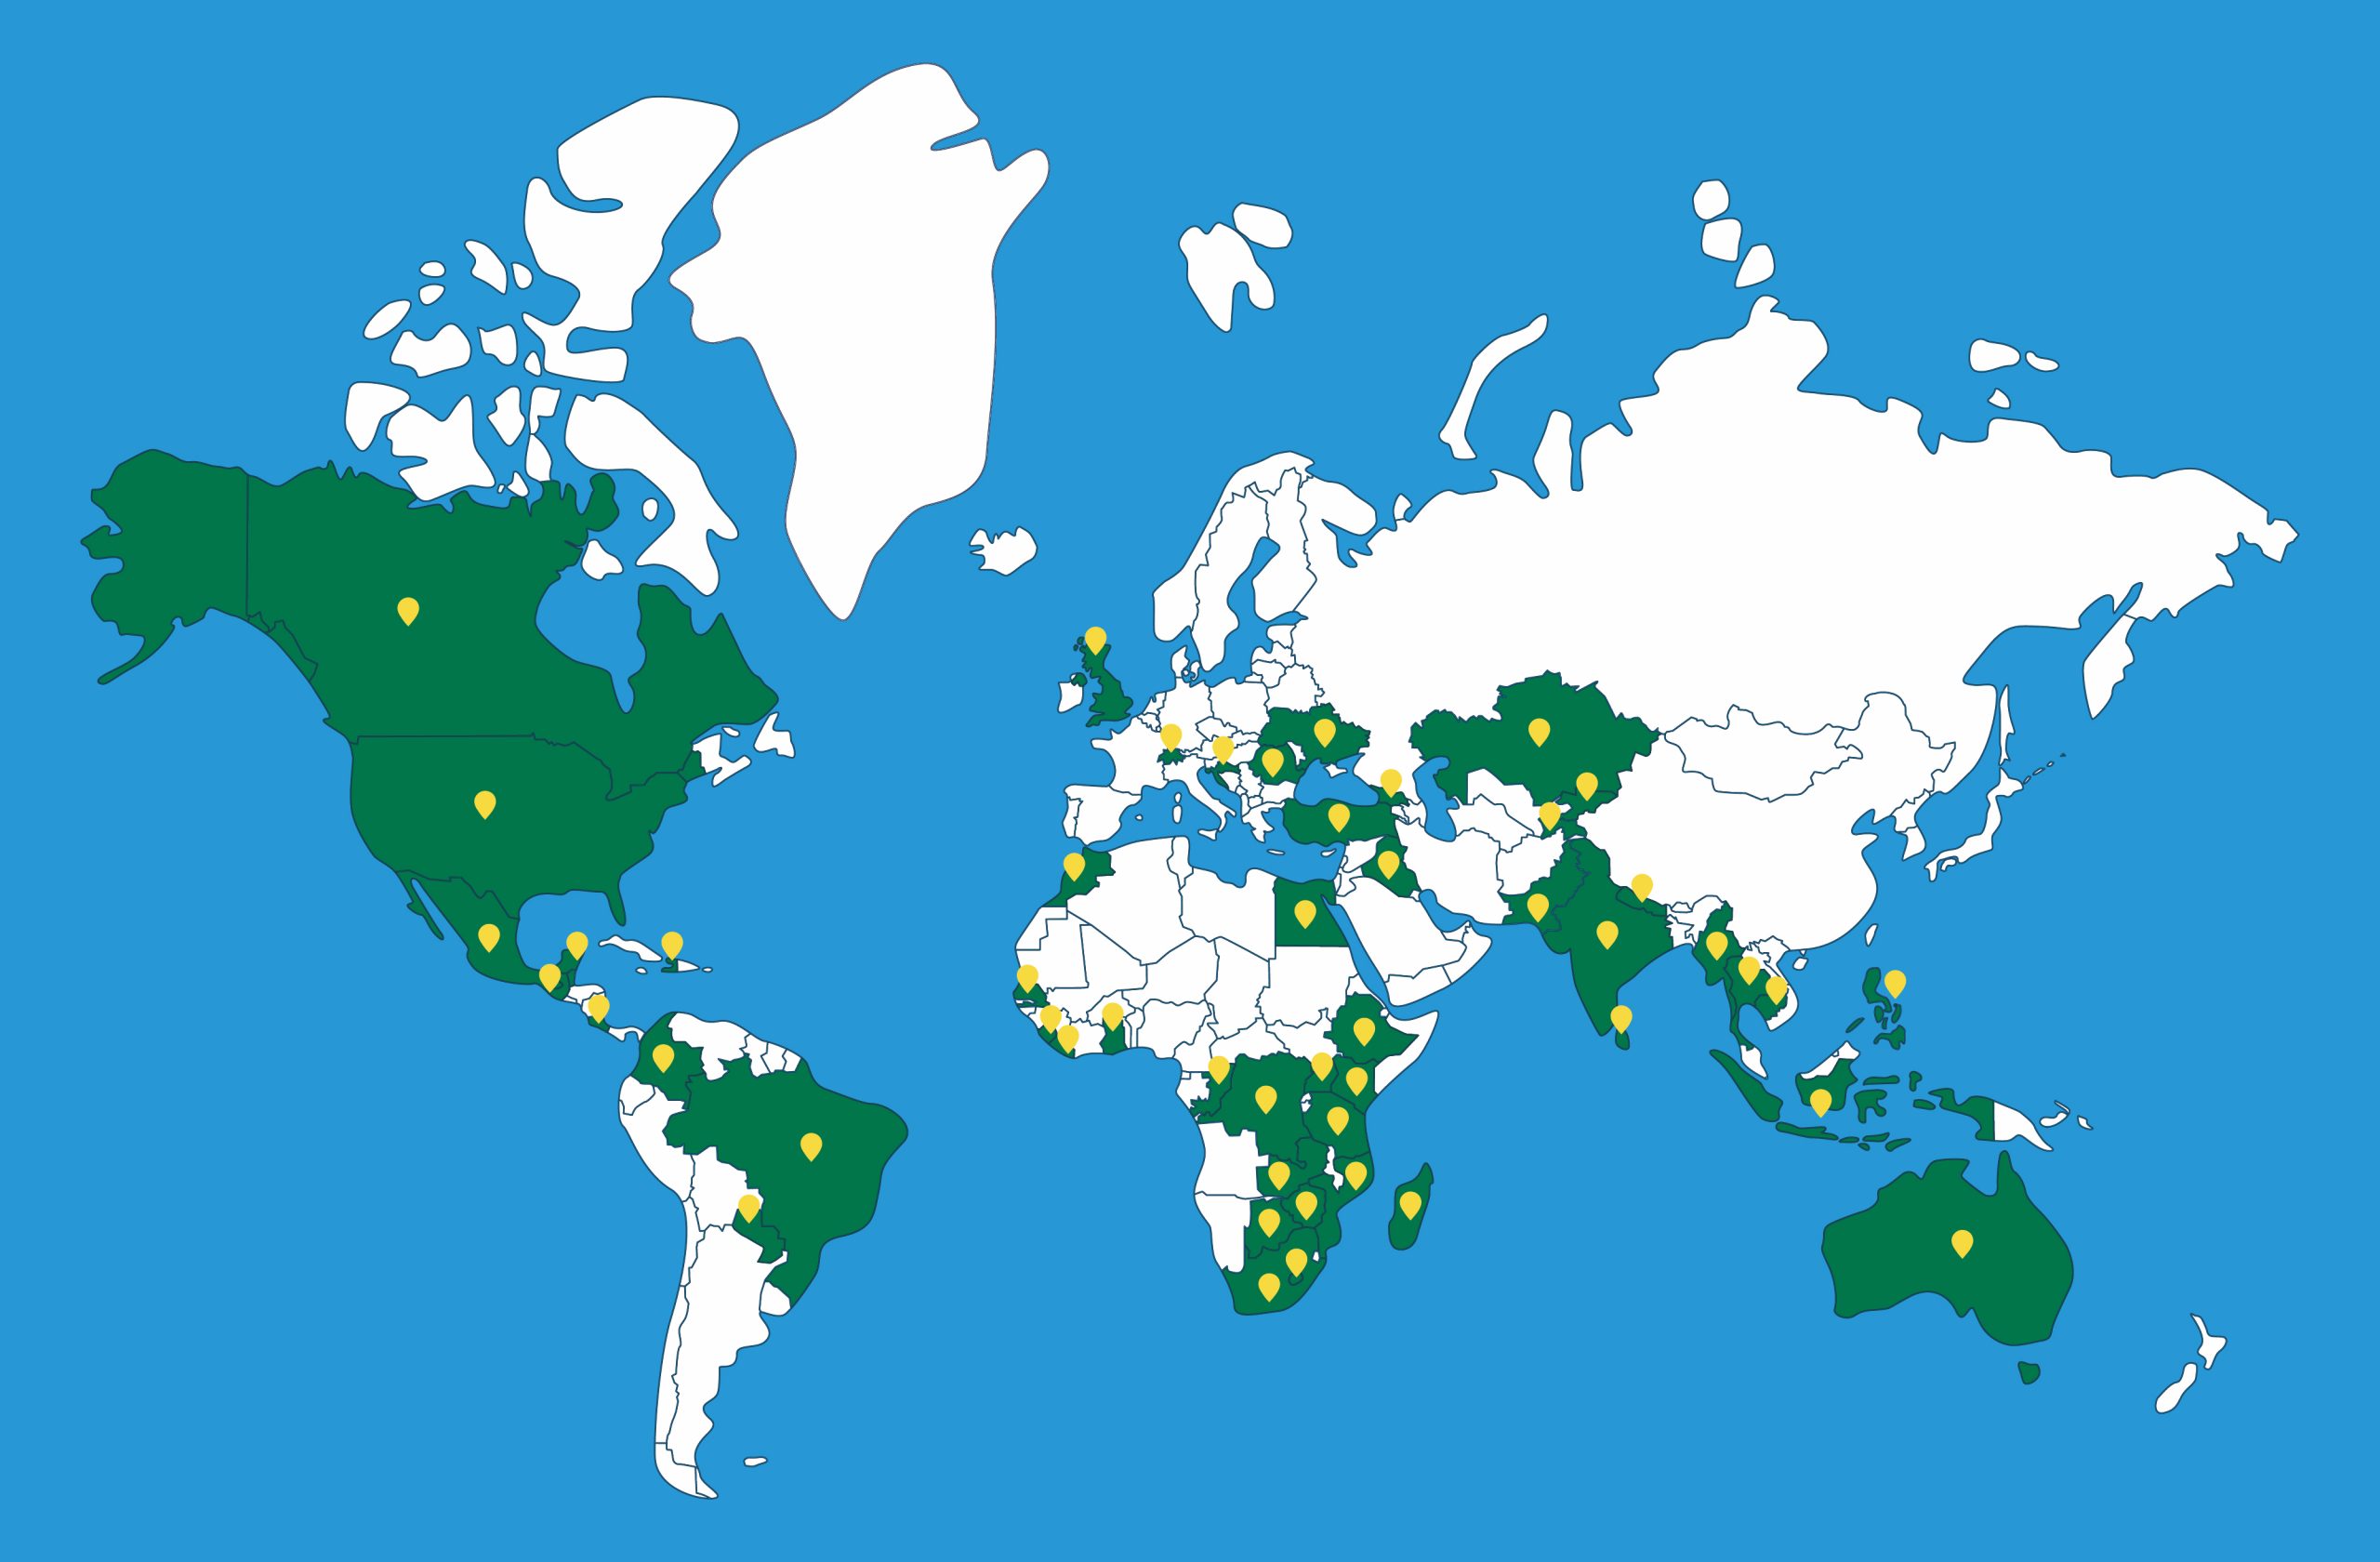 A world map identifying the 50 countries where SFAC has worked.